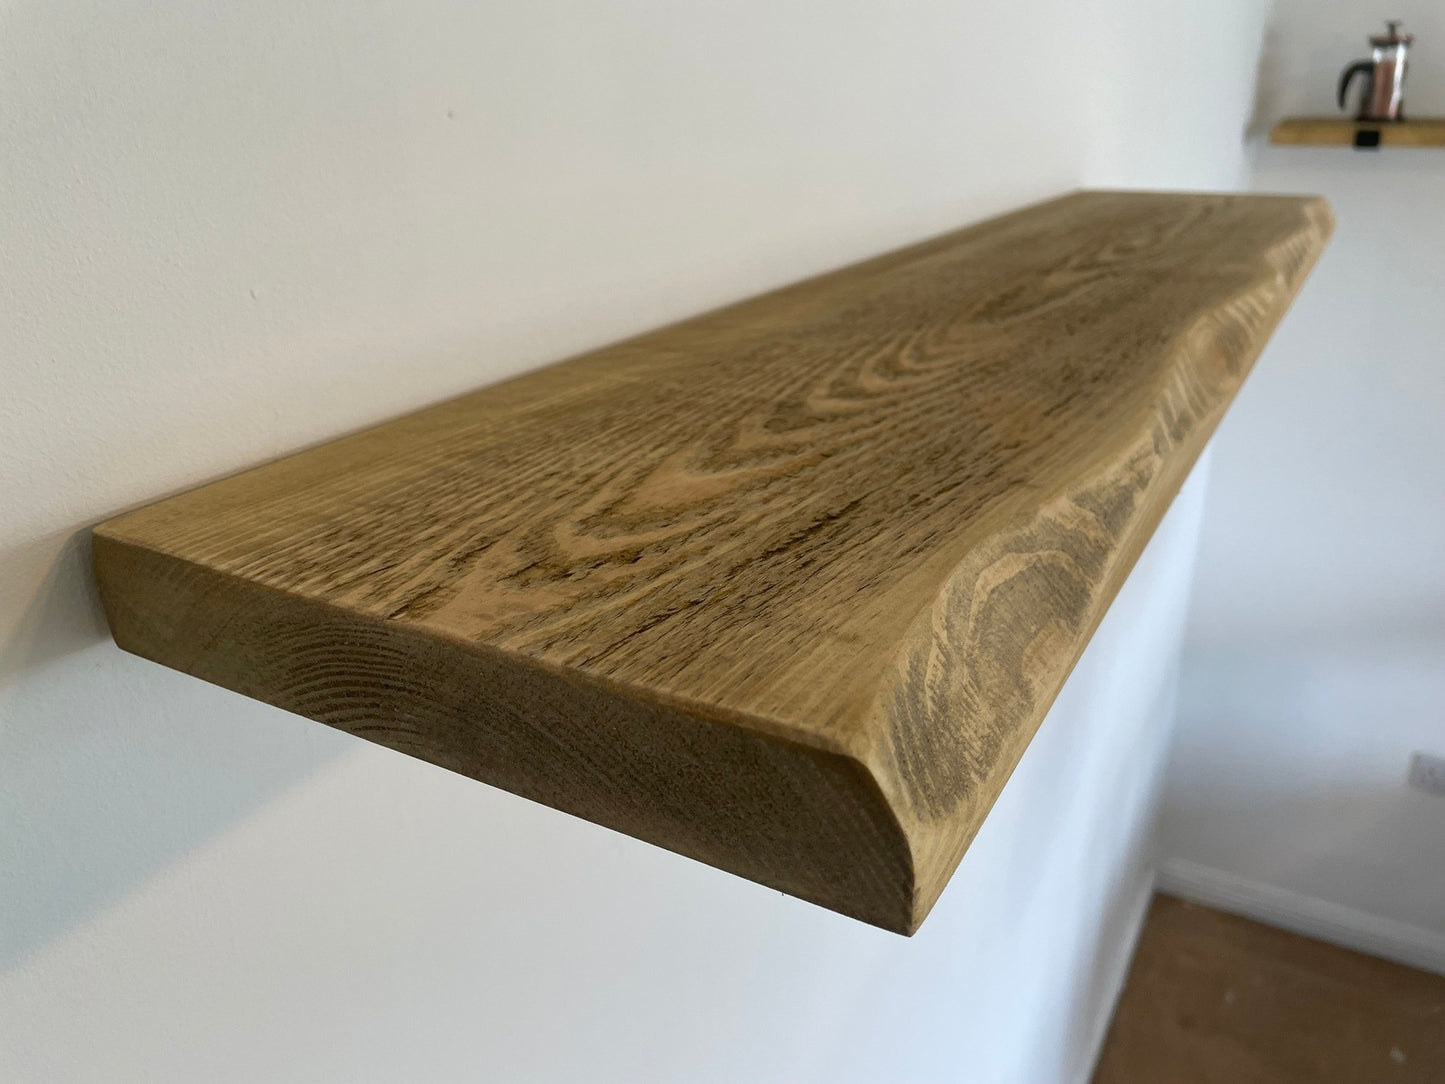 Live Edge Shelf with black prism style brackets, handmade to order, 5 wood finishes.